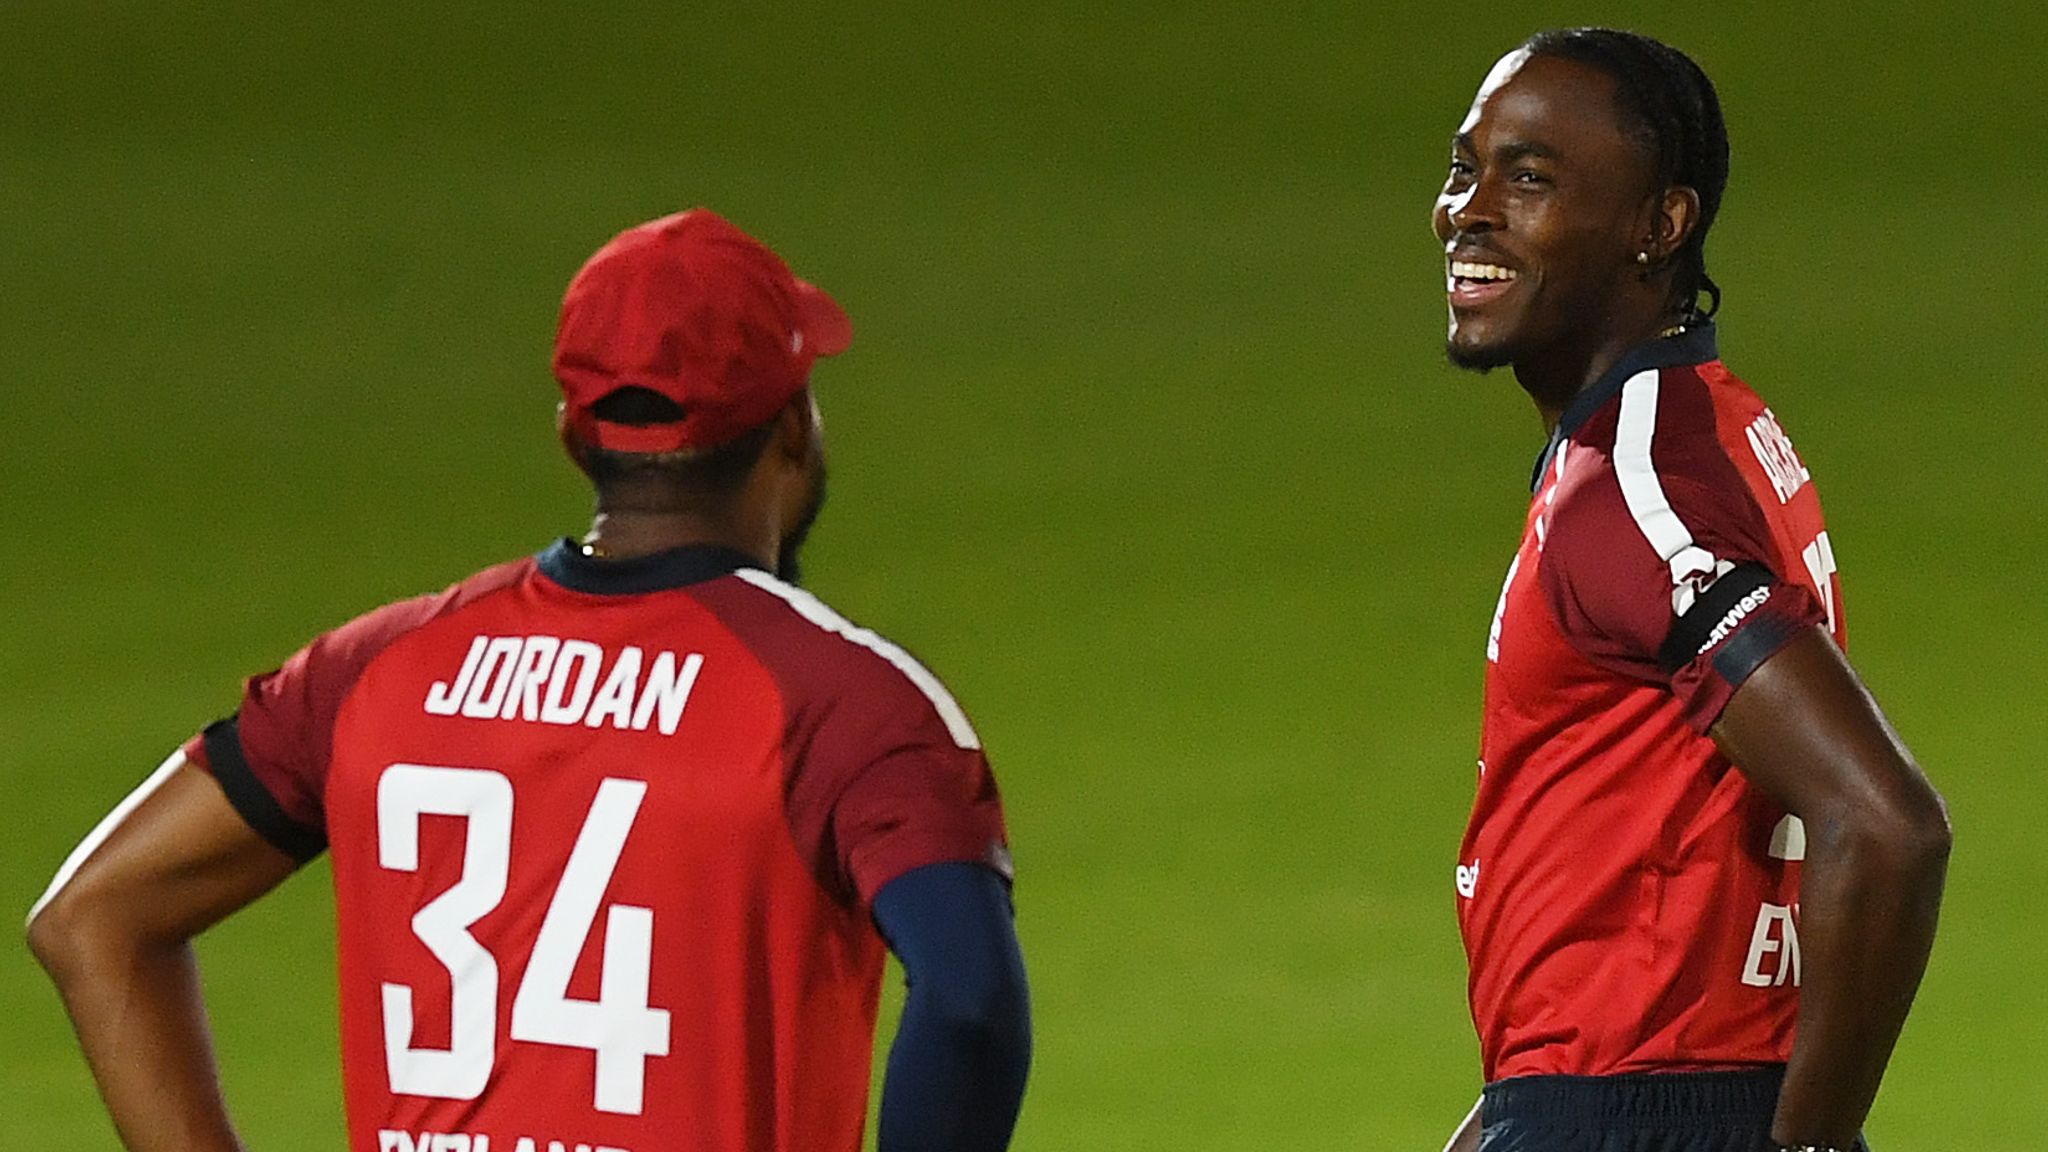 Australia unsettled by Jofra Archer and Mark Wood's pace, says England's  Chris Jordan | Cricket News | Sky Sports